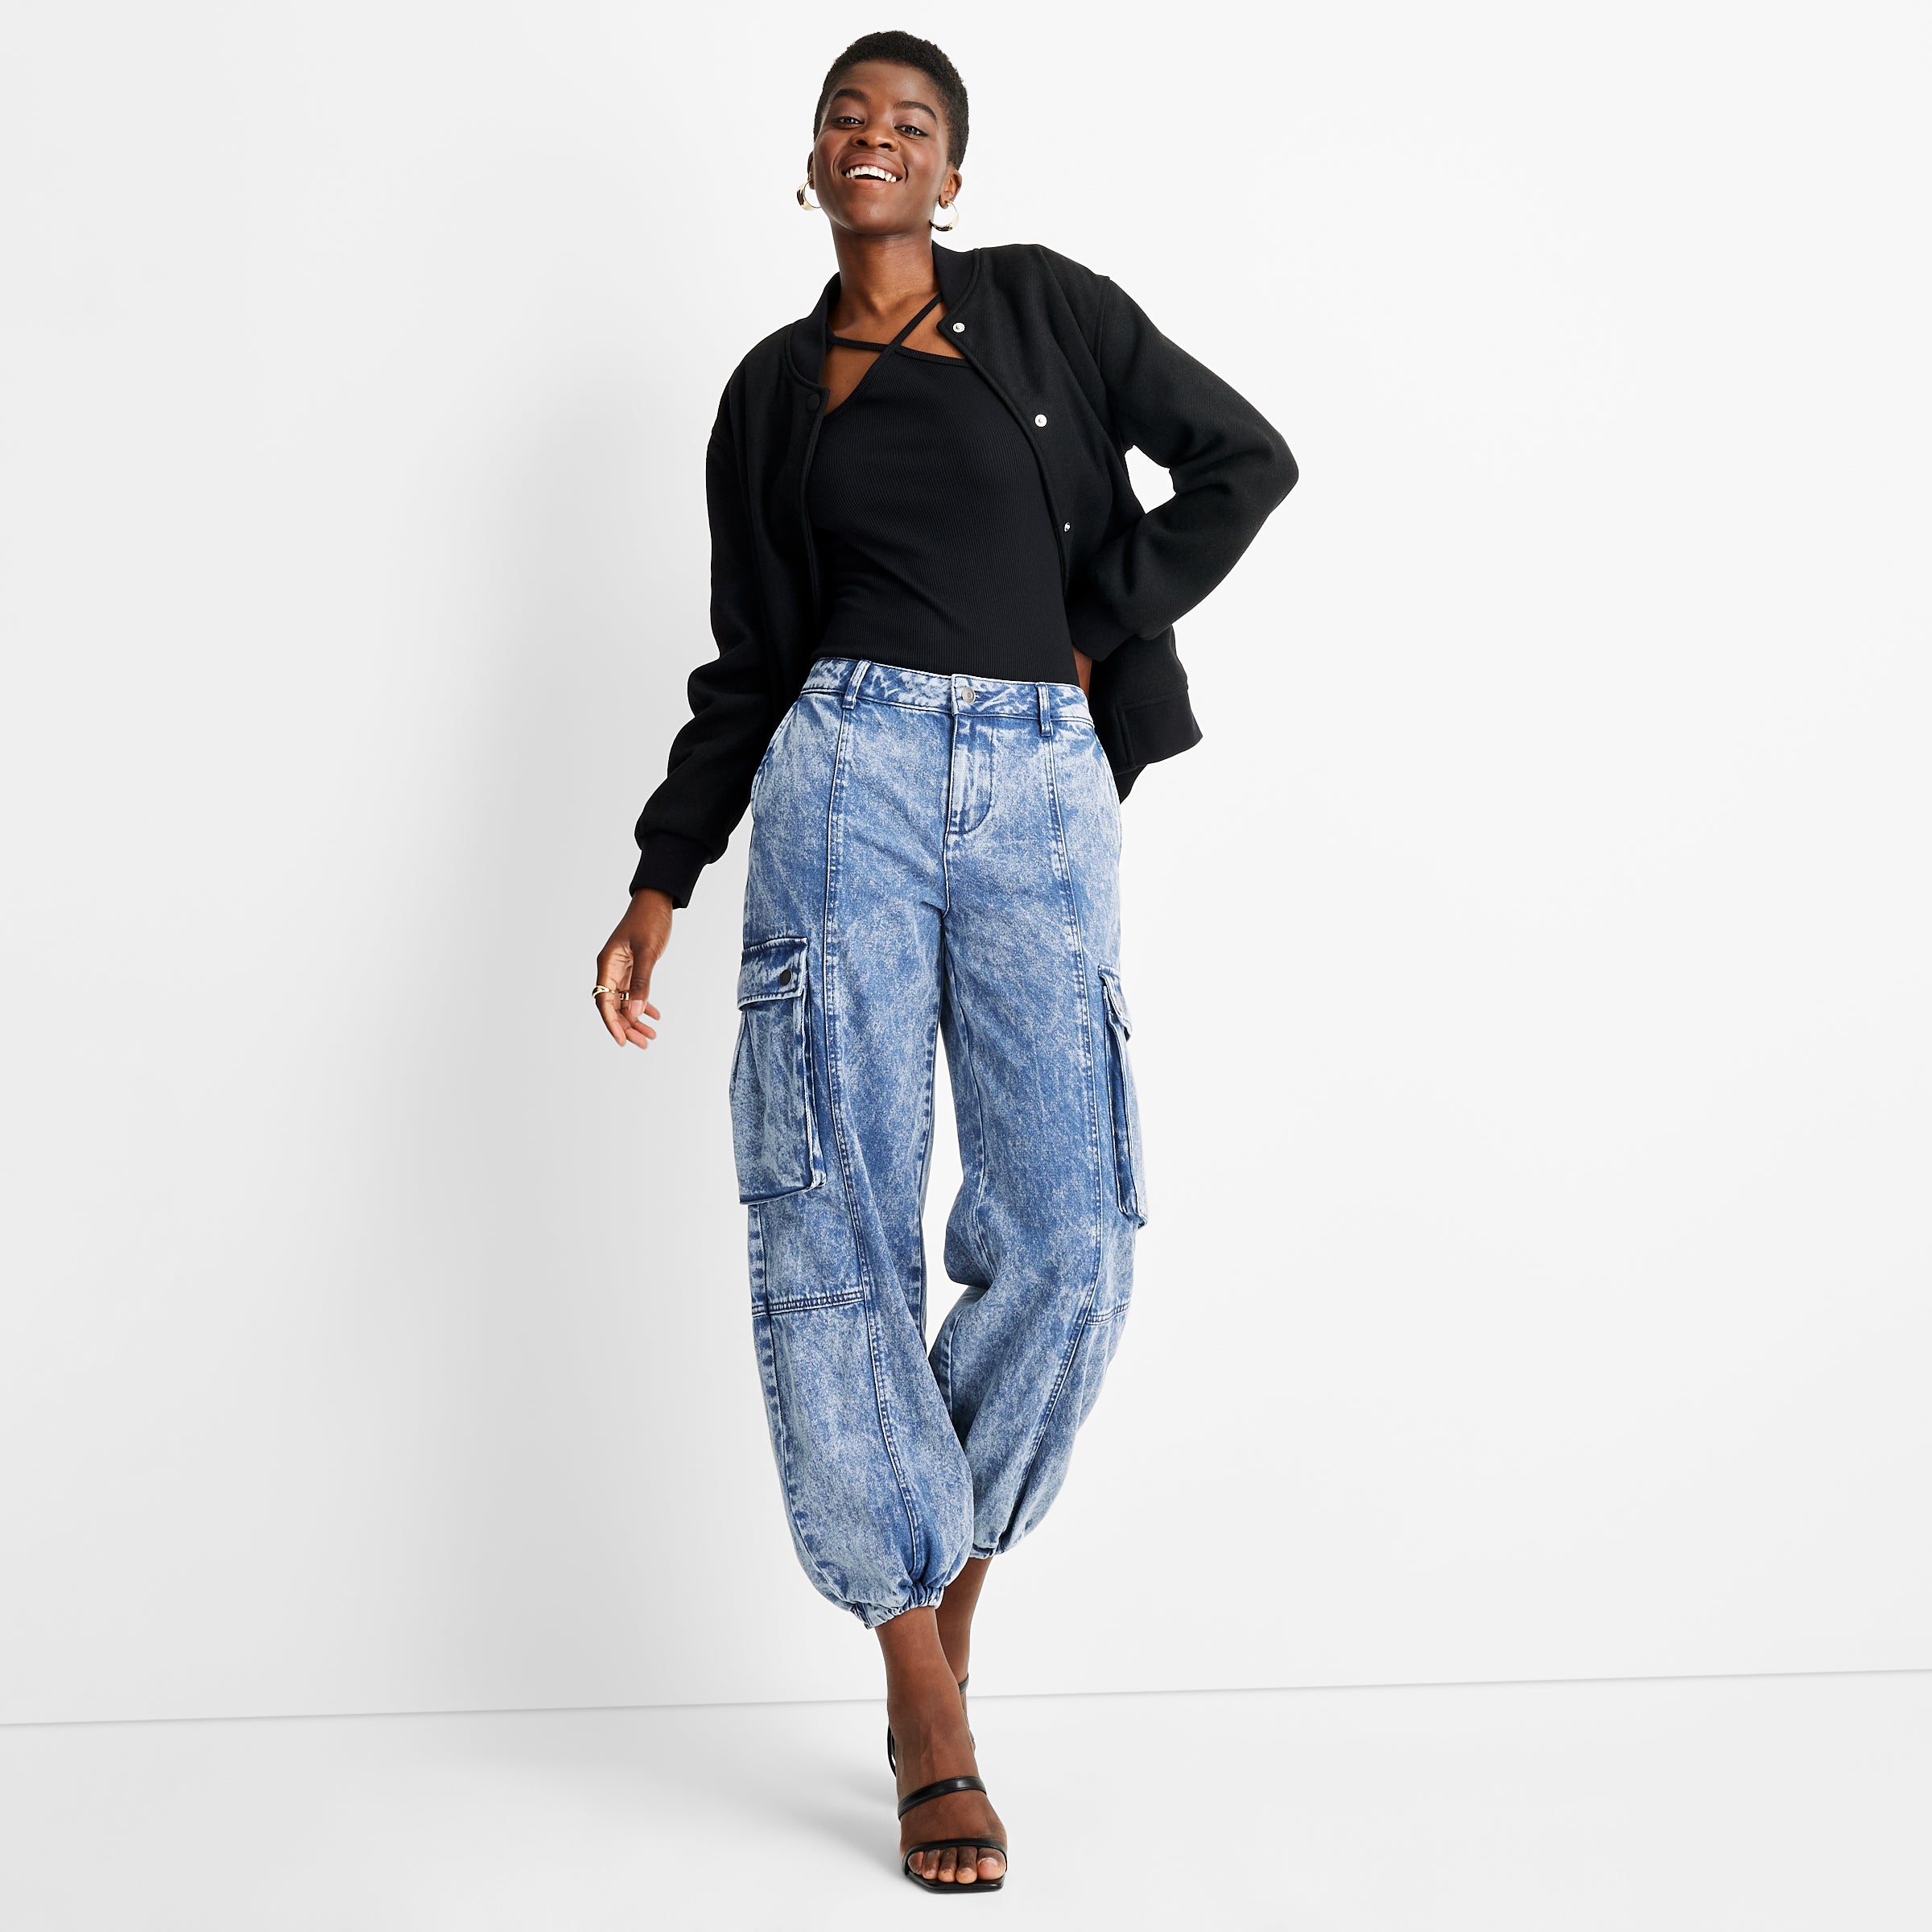 What To Buy From Kahlana Barfield Brown's Target Line